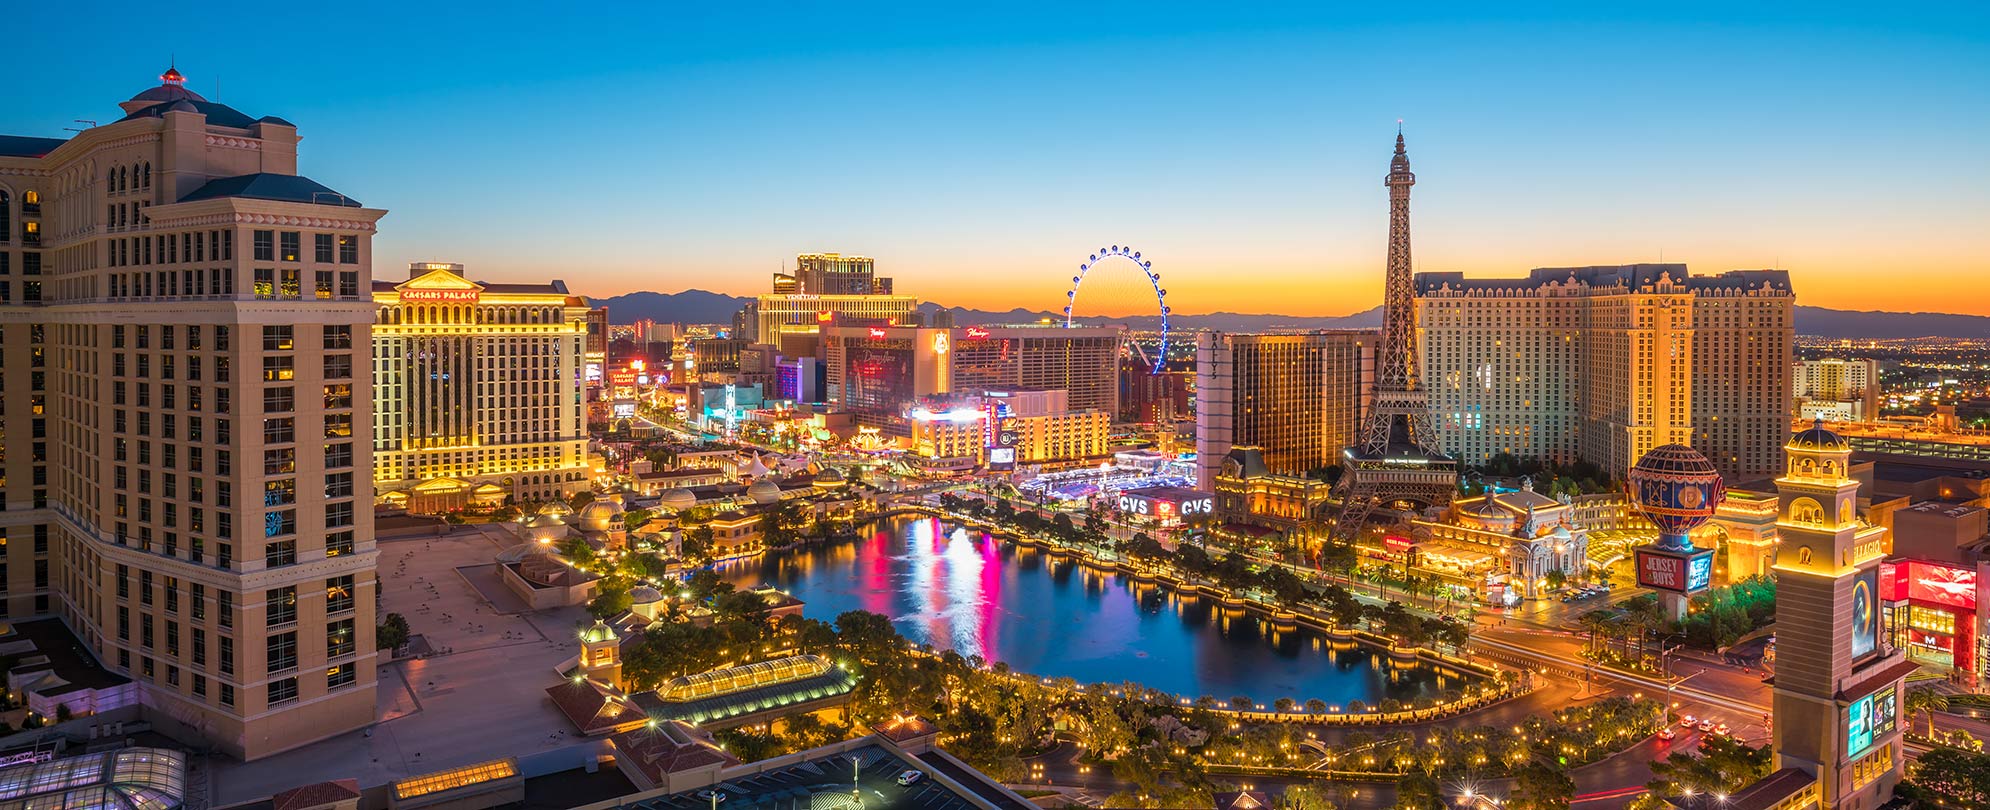 Aerial photo of Las Vegas Strip at dusk featuring the Paris Hotel replica Eiffel Tower, lake in front of Bellagio Hotel, Caesar's Palace, and view of High Roller observation wheel.